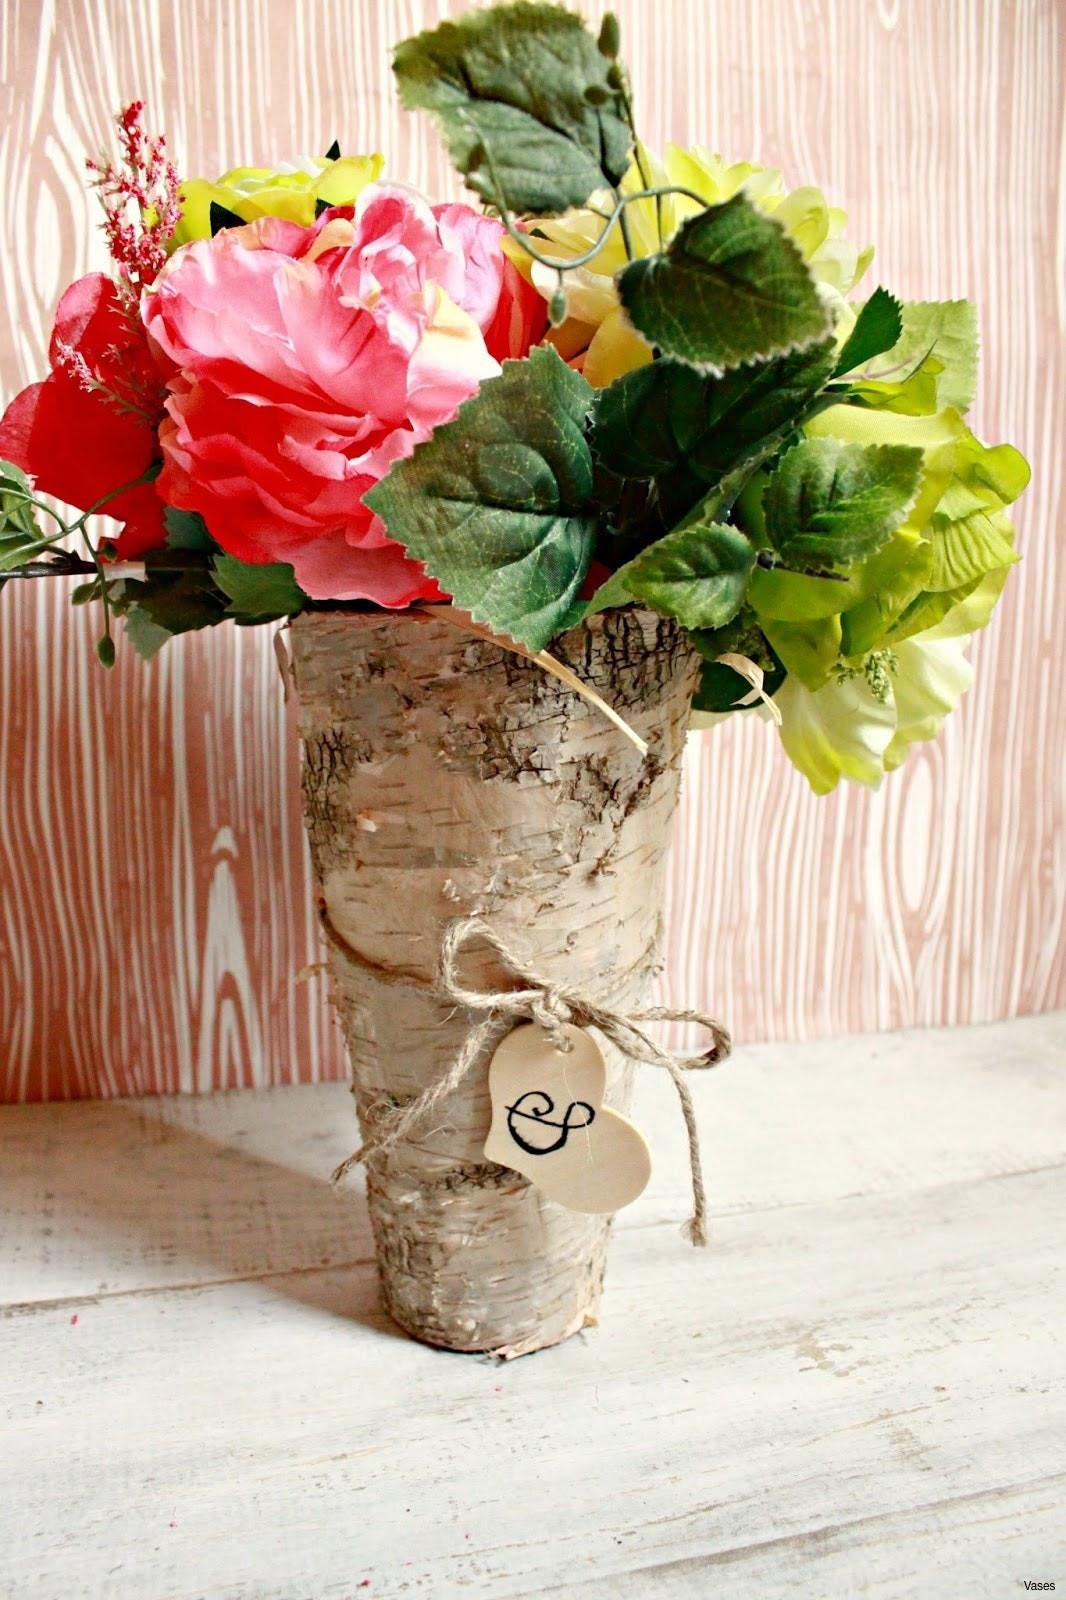 decorative bottles and vases of diy wedding ideas on a budget fresh flowers and decorations for in diy wedding ideas on a budget fresh flowers and decorations for weddings h vases diy wood